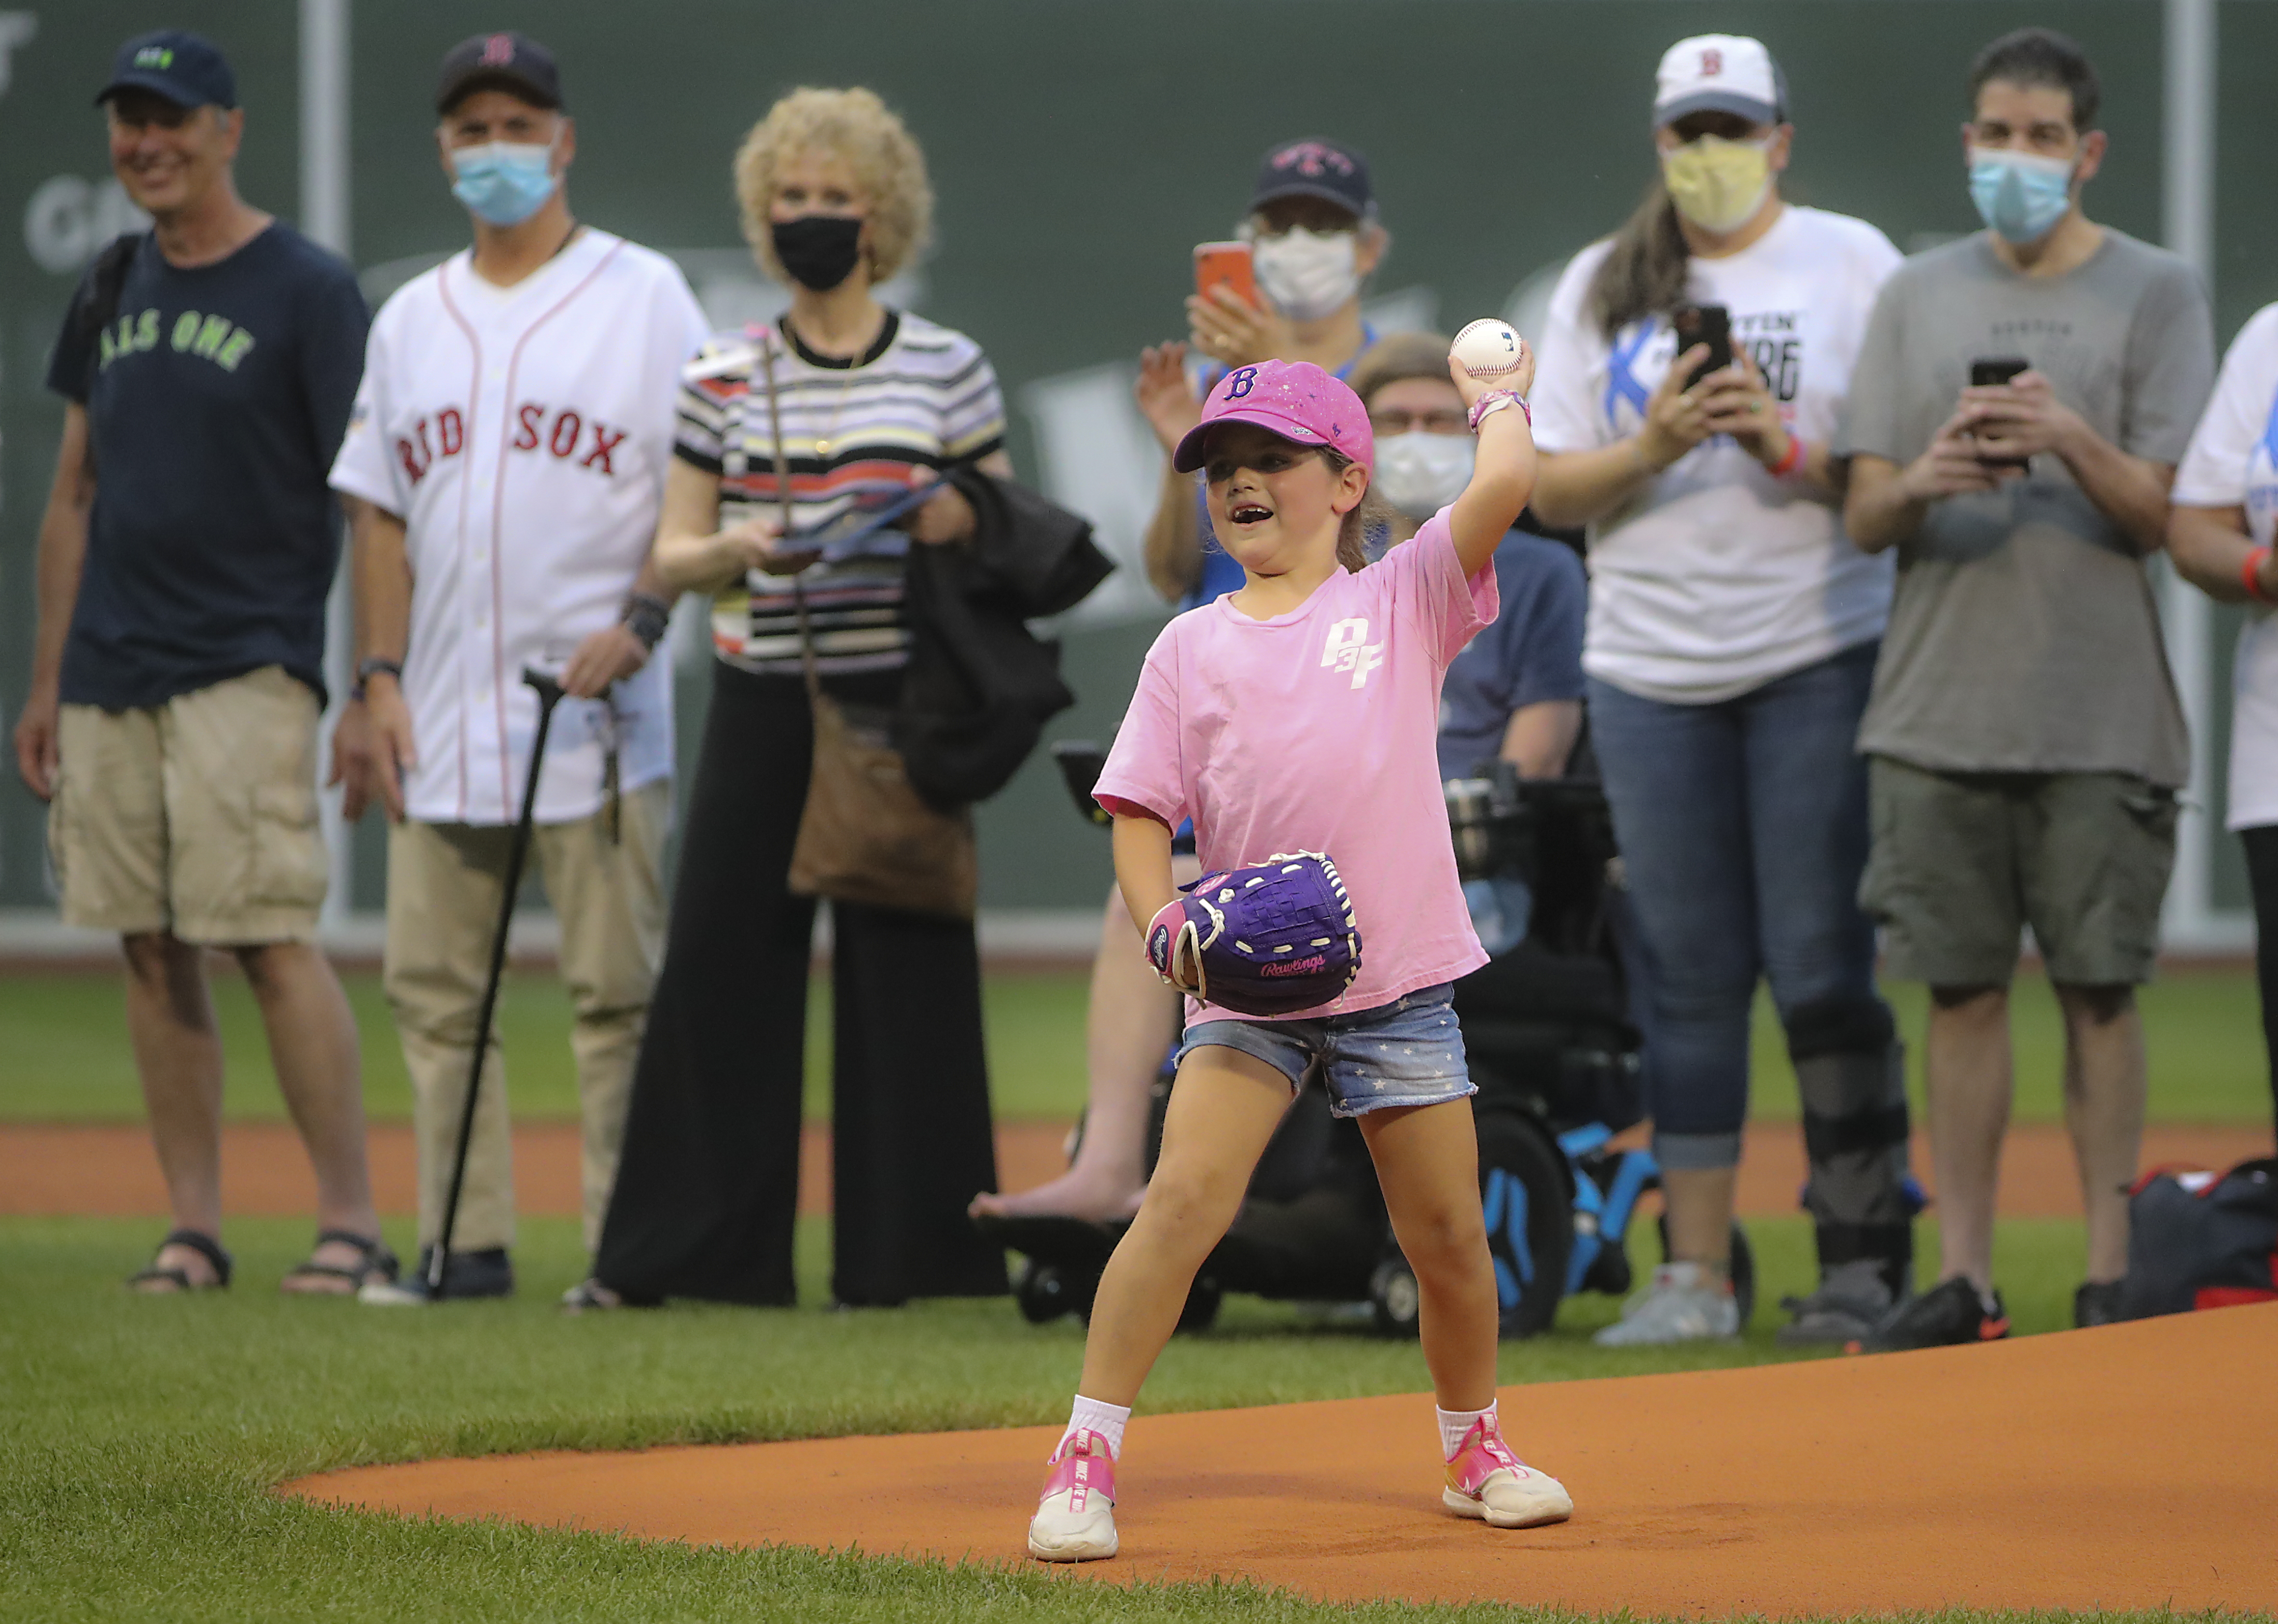 Pete Frates's daughter throws out first pitch at Fenway Park during Lou  Gehrig Day celebration - The Boston Globe